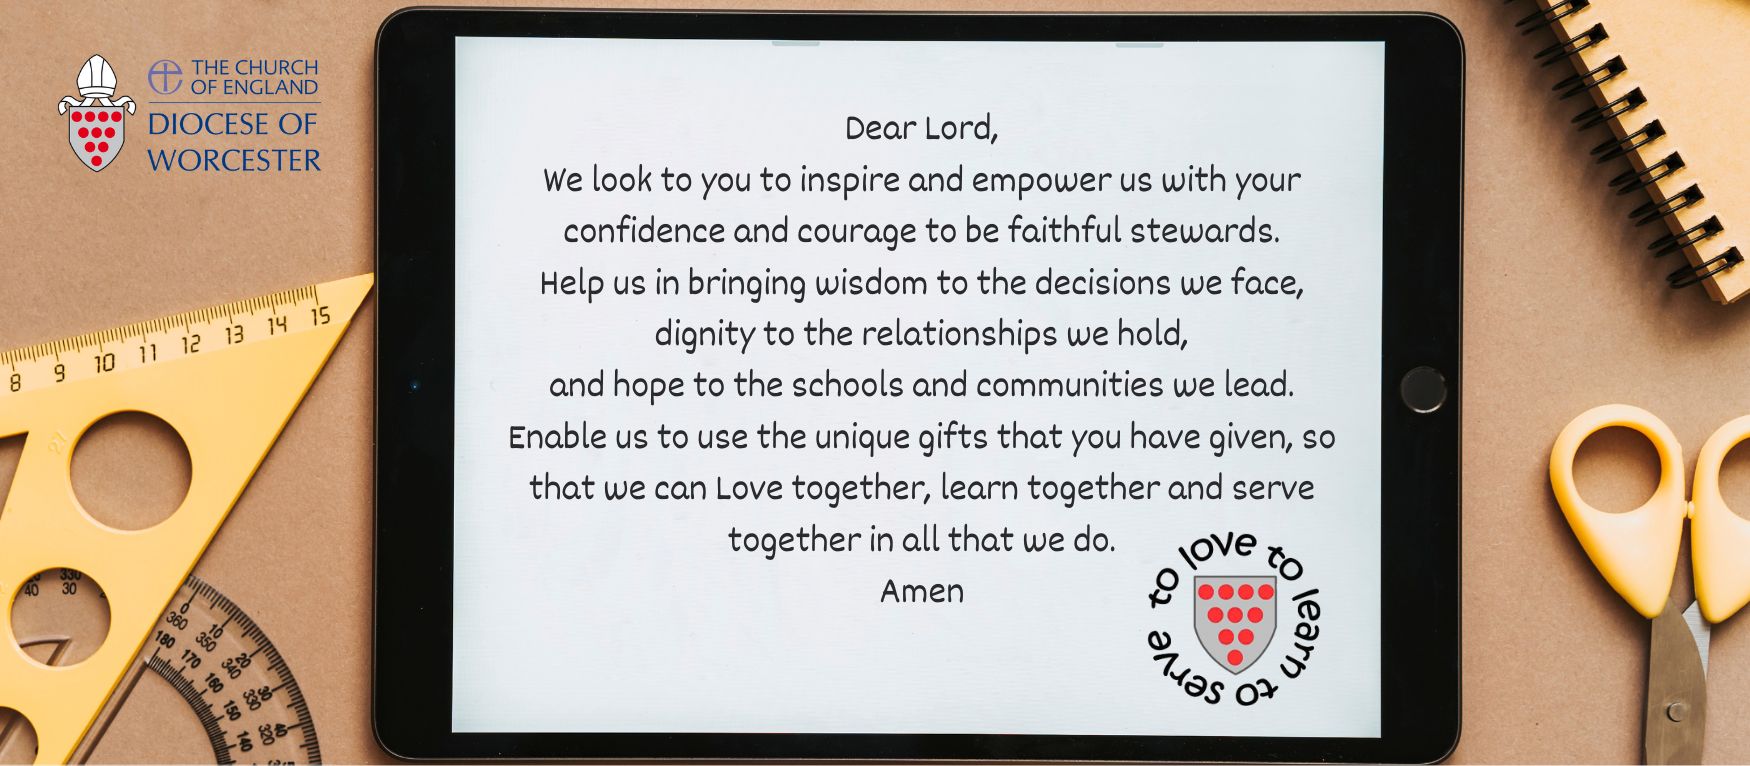 Dear Lord, We look to you to inspire and empower us with your confidence and courage to be faithful stewards. Help us in bringing wisdom to the decisions we face, dignity to the relationships we hold, and hope to the schools and communities we lead. Enable us to use the unique gifts that you have given, so that we can Love together, learn together and serve together in all that we do. Amen